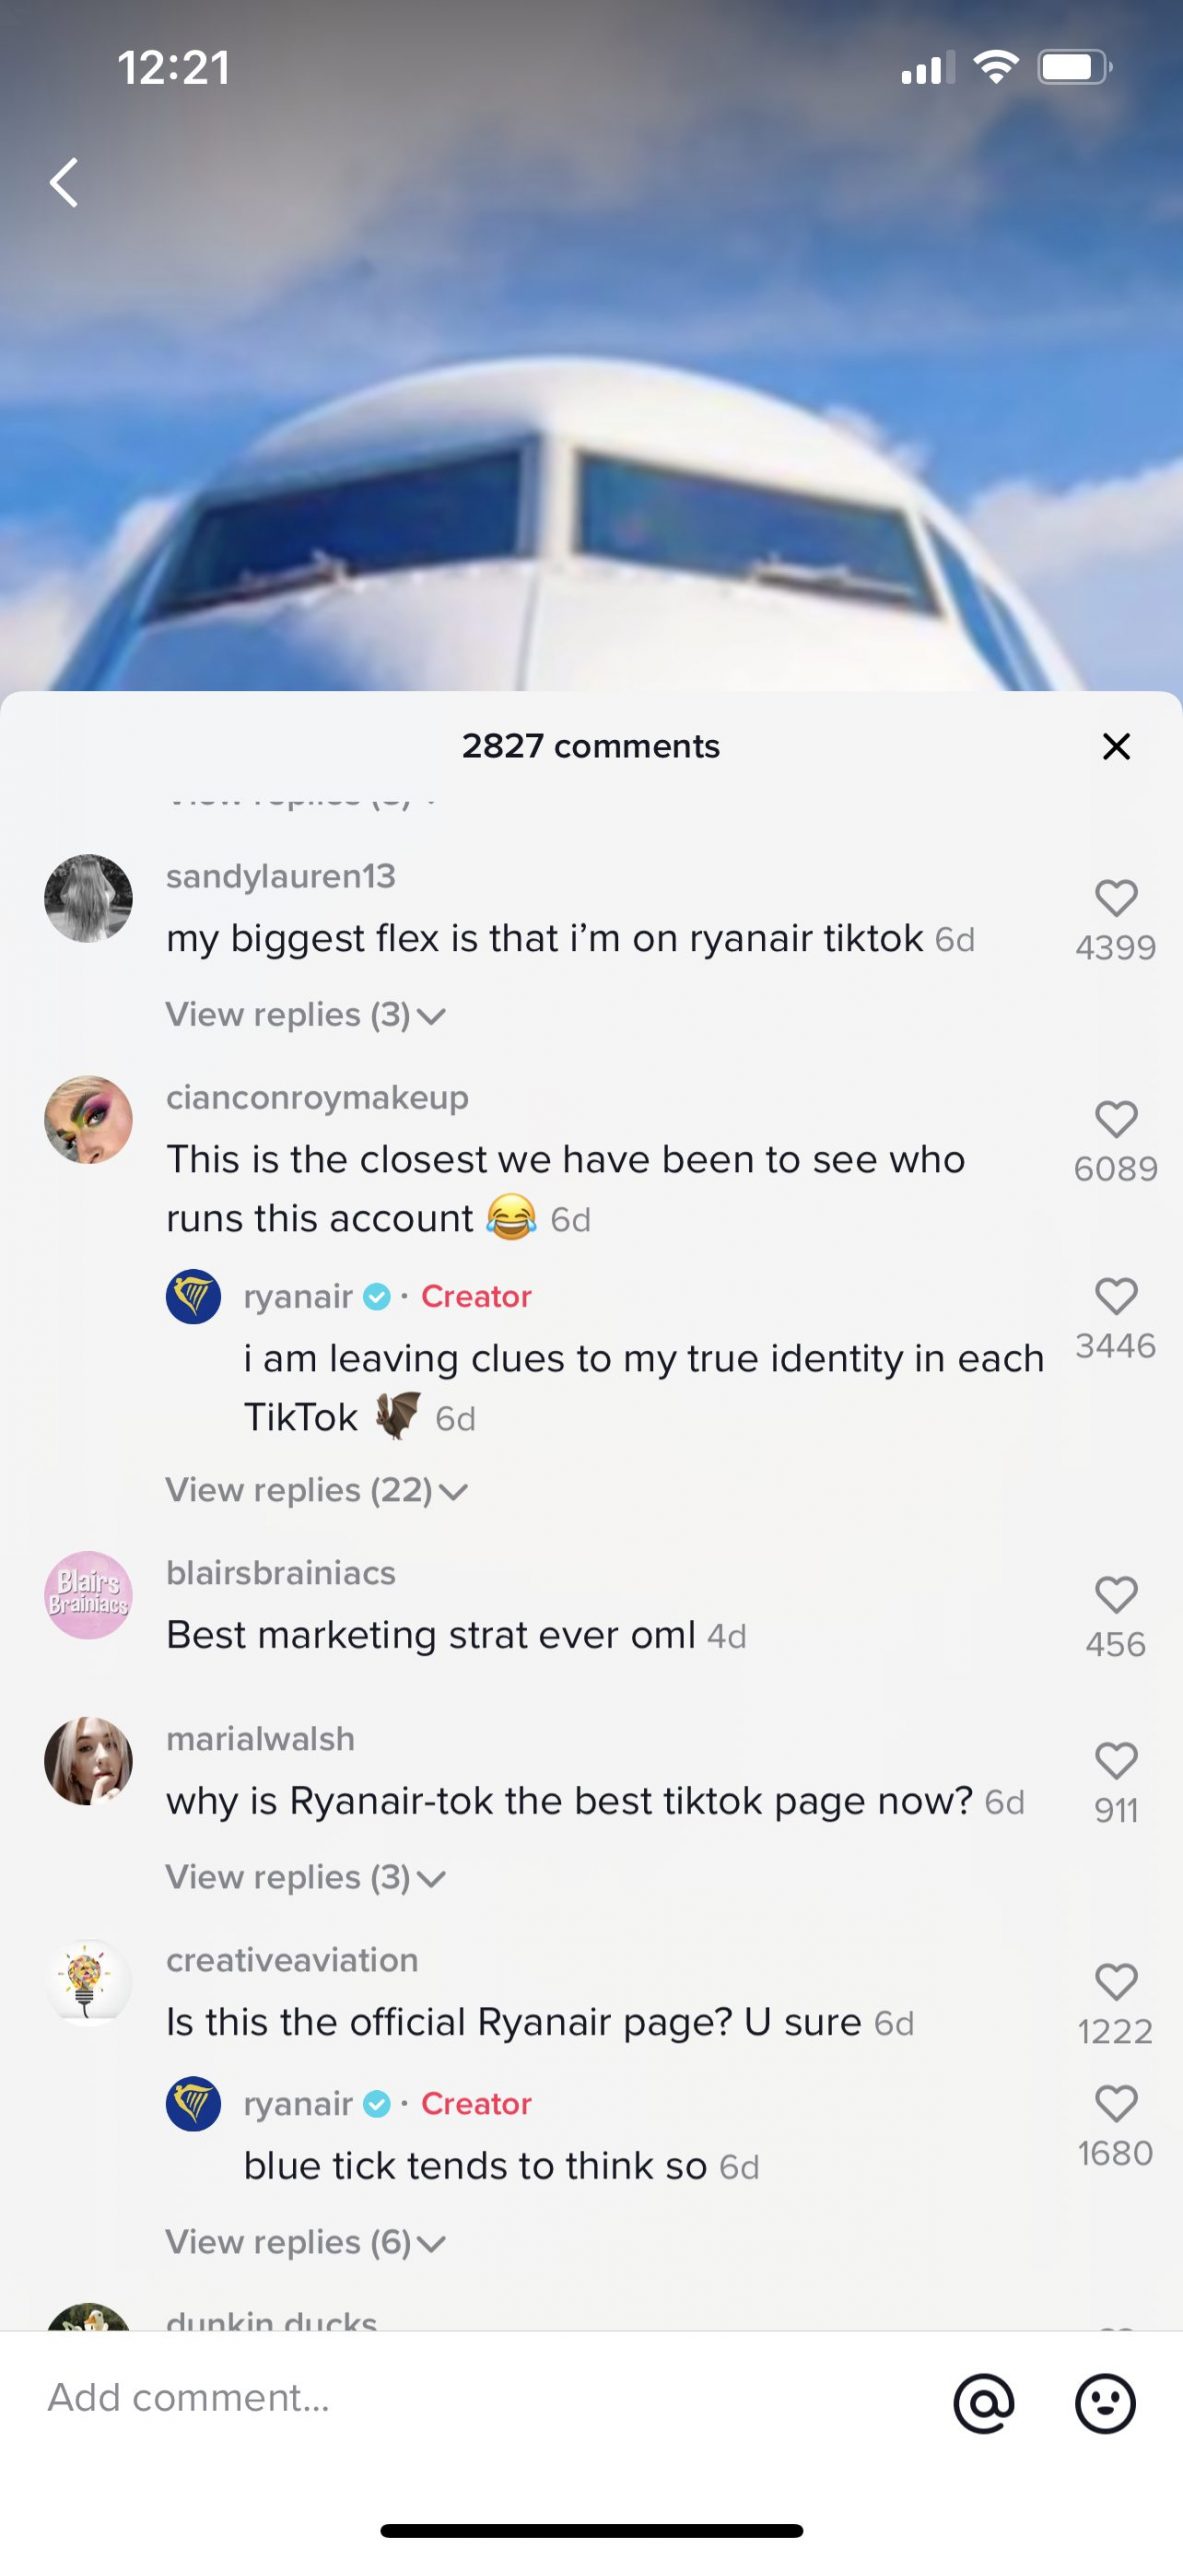 The Best Of Brands Using TikTok In 2022: What Are Their Secrets?